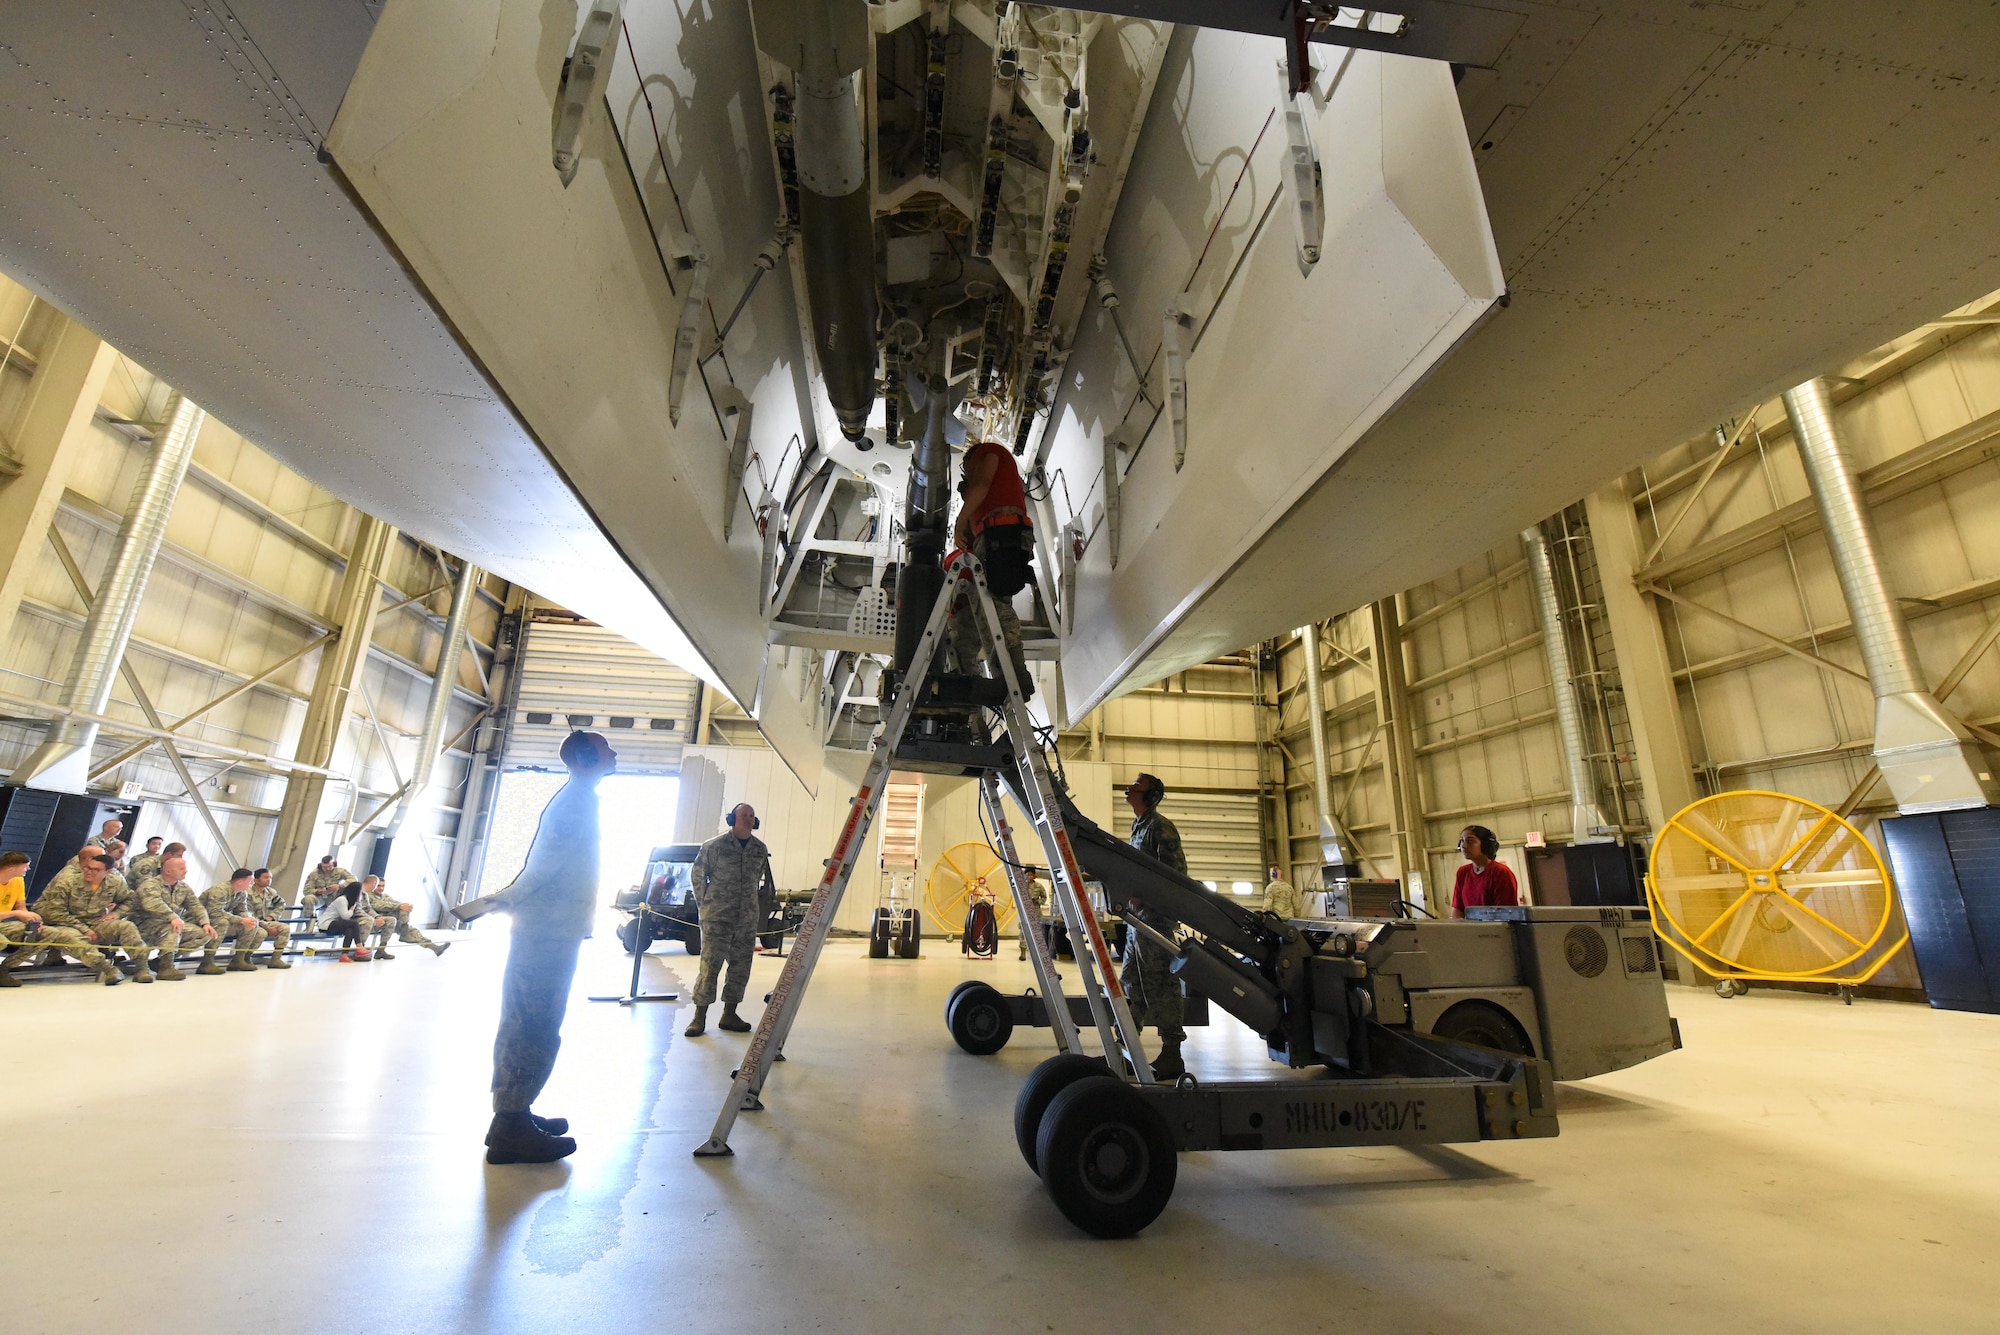 Weapons loaders from the 34th Aircraft Maintenance Unit load inert GBU-54 bombs onto a simulated B-1 Bomber during a load competition at Ellsworth Air Force Base, S.D., July 13, 2018. These competitions test to see which AMU can load bombs onto a simulated B-1 Bomber the fastest. (U.S Air Force photo by Airman 1st Class Thomas Karol)